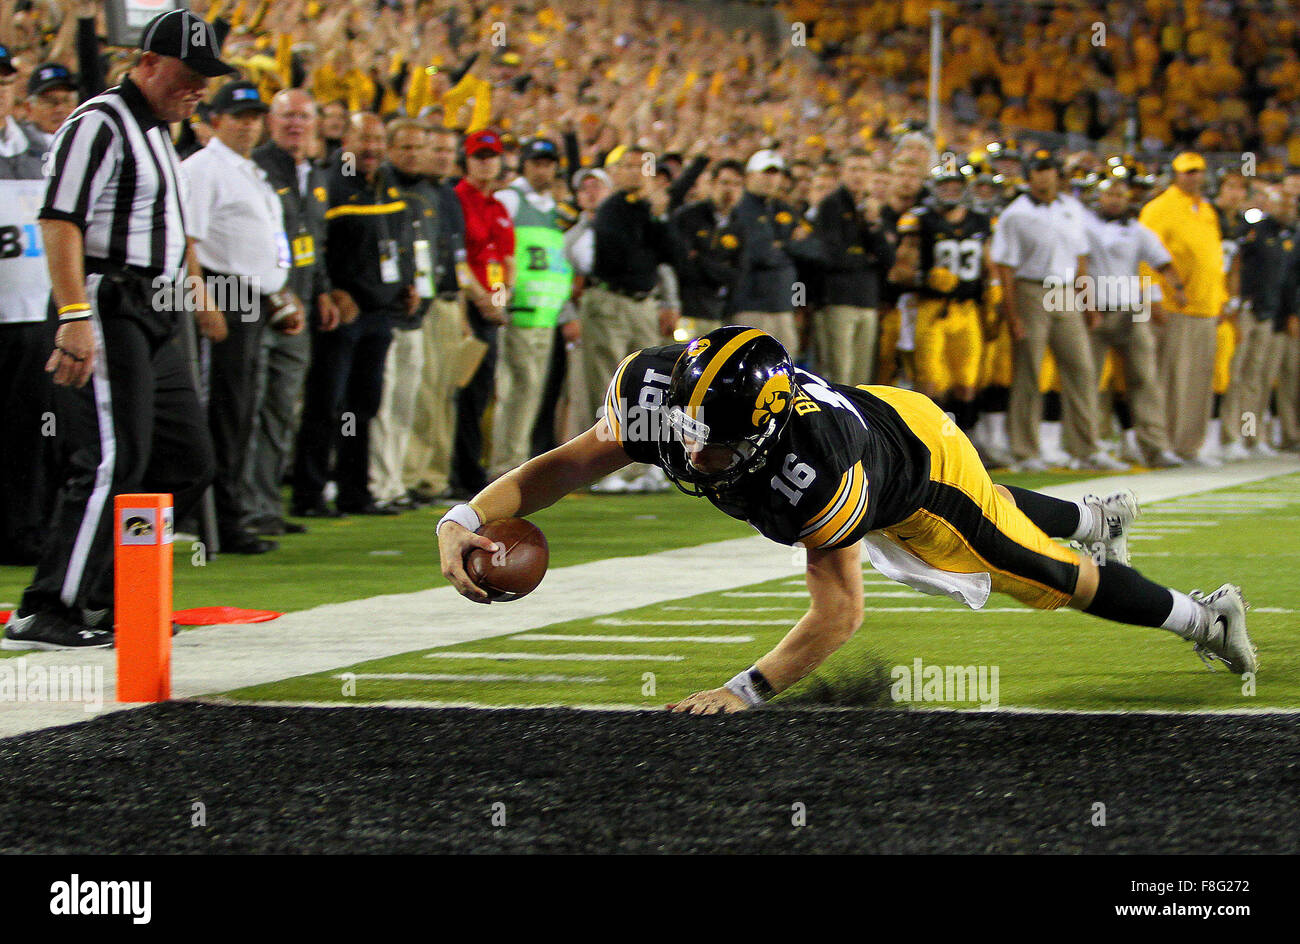 Iowa City, Iowa, USA. 19th Sep, 2015. Iowa quarterback C.J. Beathard dives for the endzone and scores, Saturday, September 19, 2015, during first half action against Pittsburgh at Kinnick Stadium in Iowa City. © John Schultz/Quad-City Times/ZUMA Wire/Alamy Live News Stock Photo